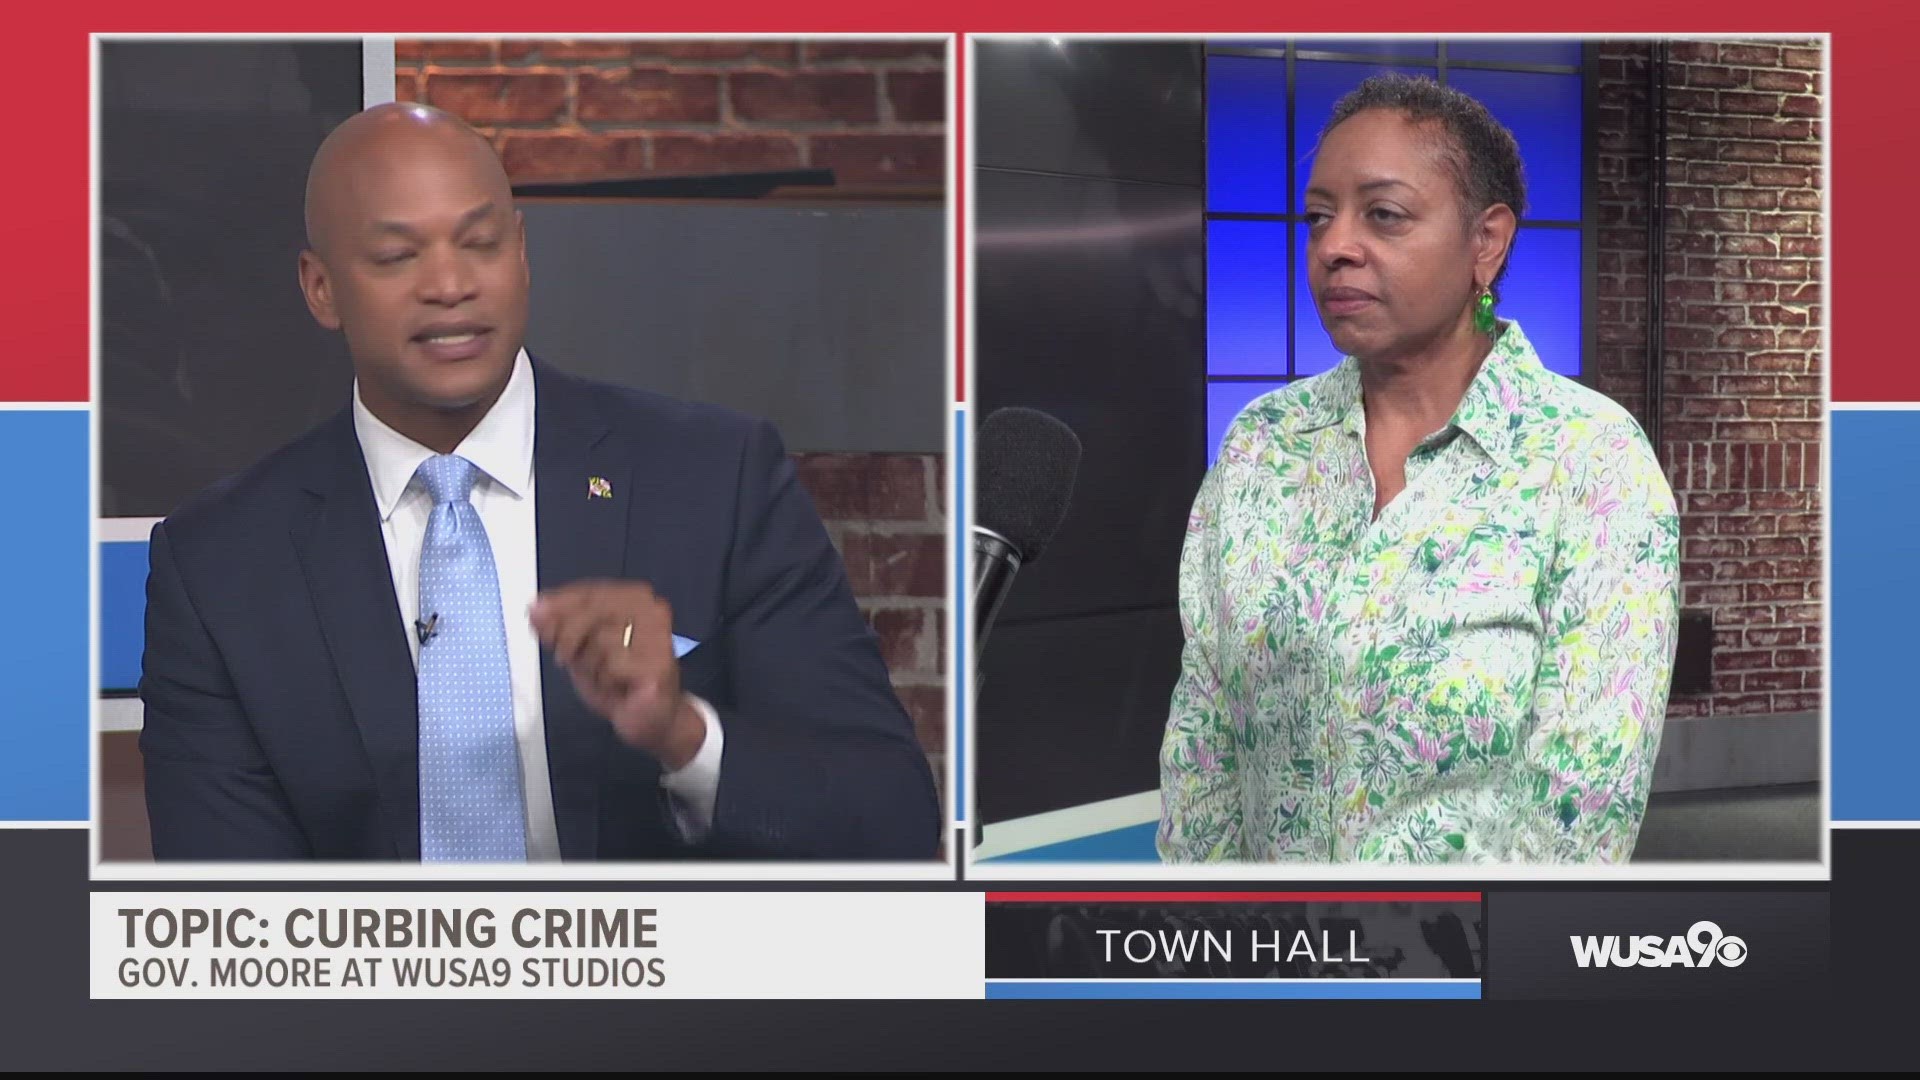 "We have seen the homicide rate in the state of Maryland in the past 8 years has doubled. We knew we were going to come in and take an entirely different approach."